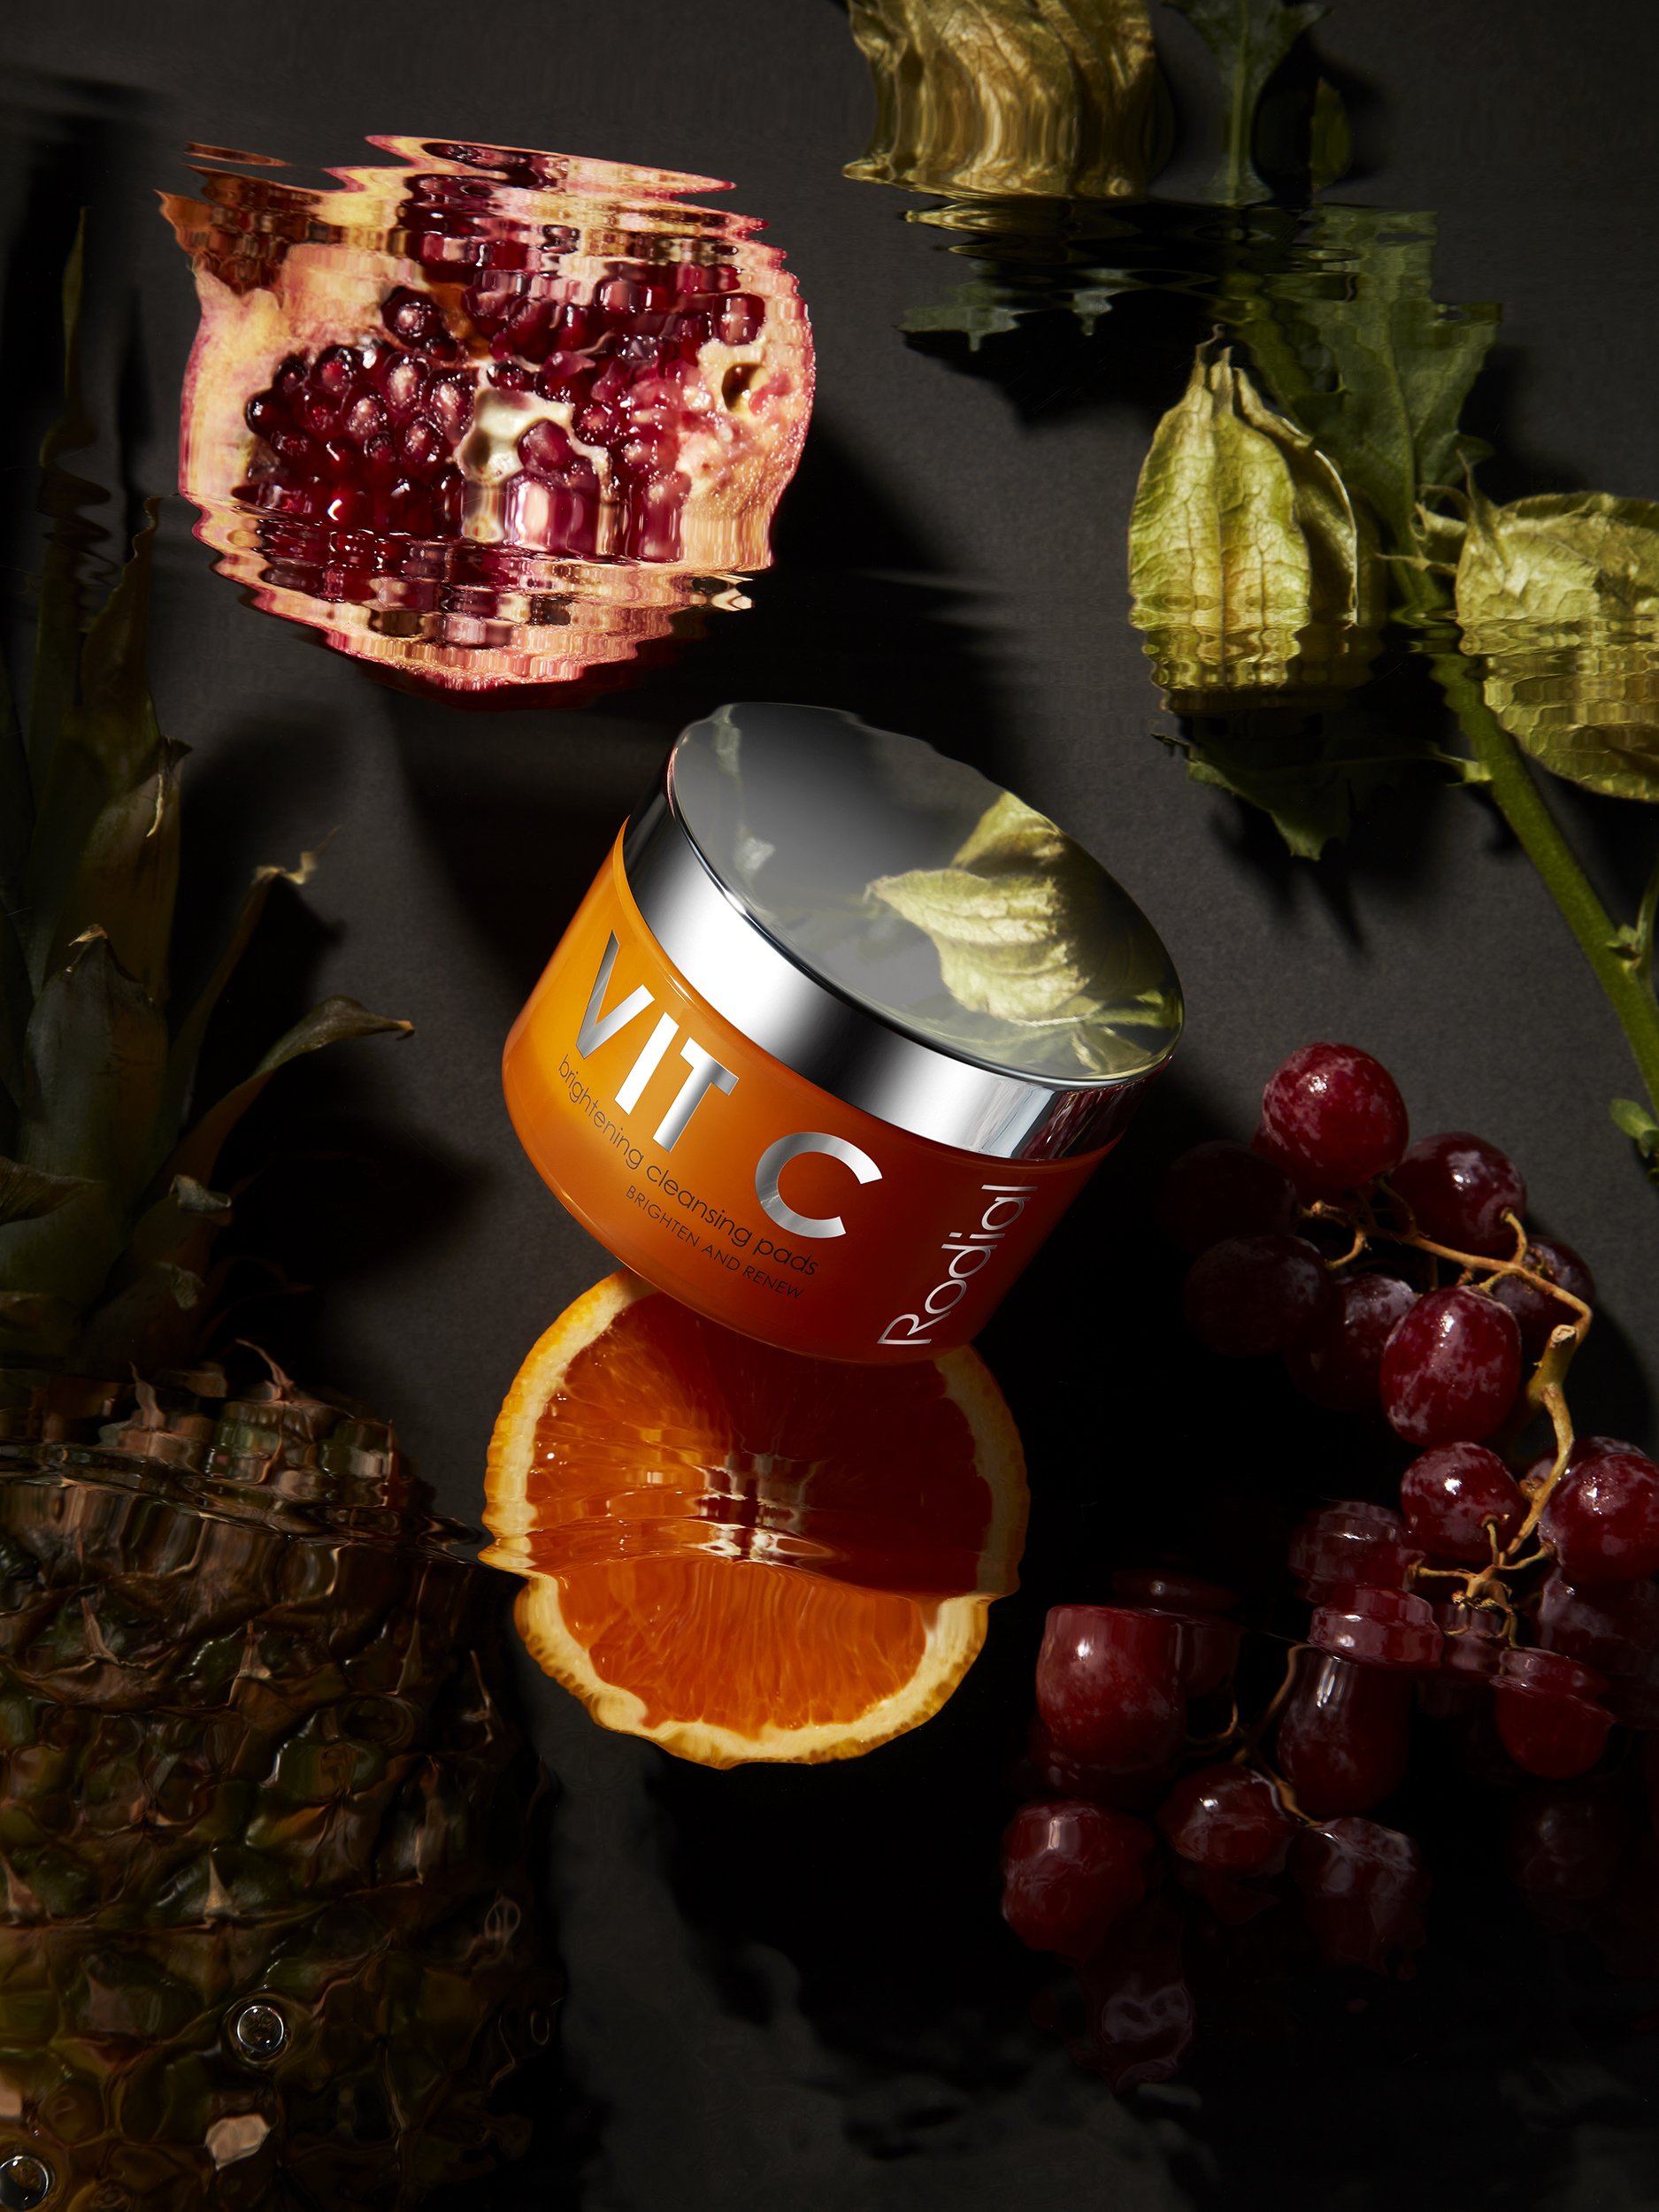 Rodial Vit C Cleansing Pads - Creative still-life photography by Simon Lyle Ritchie